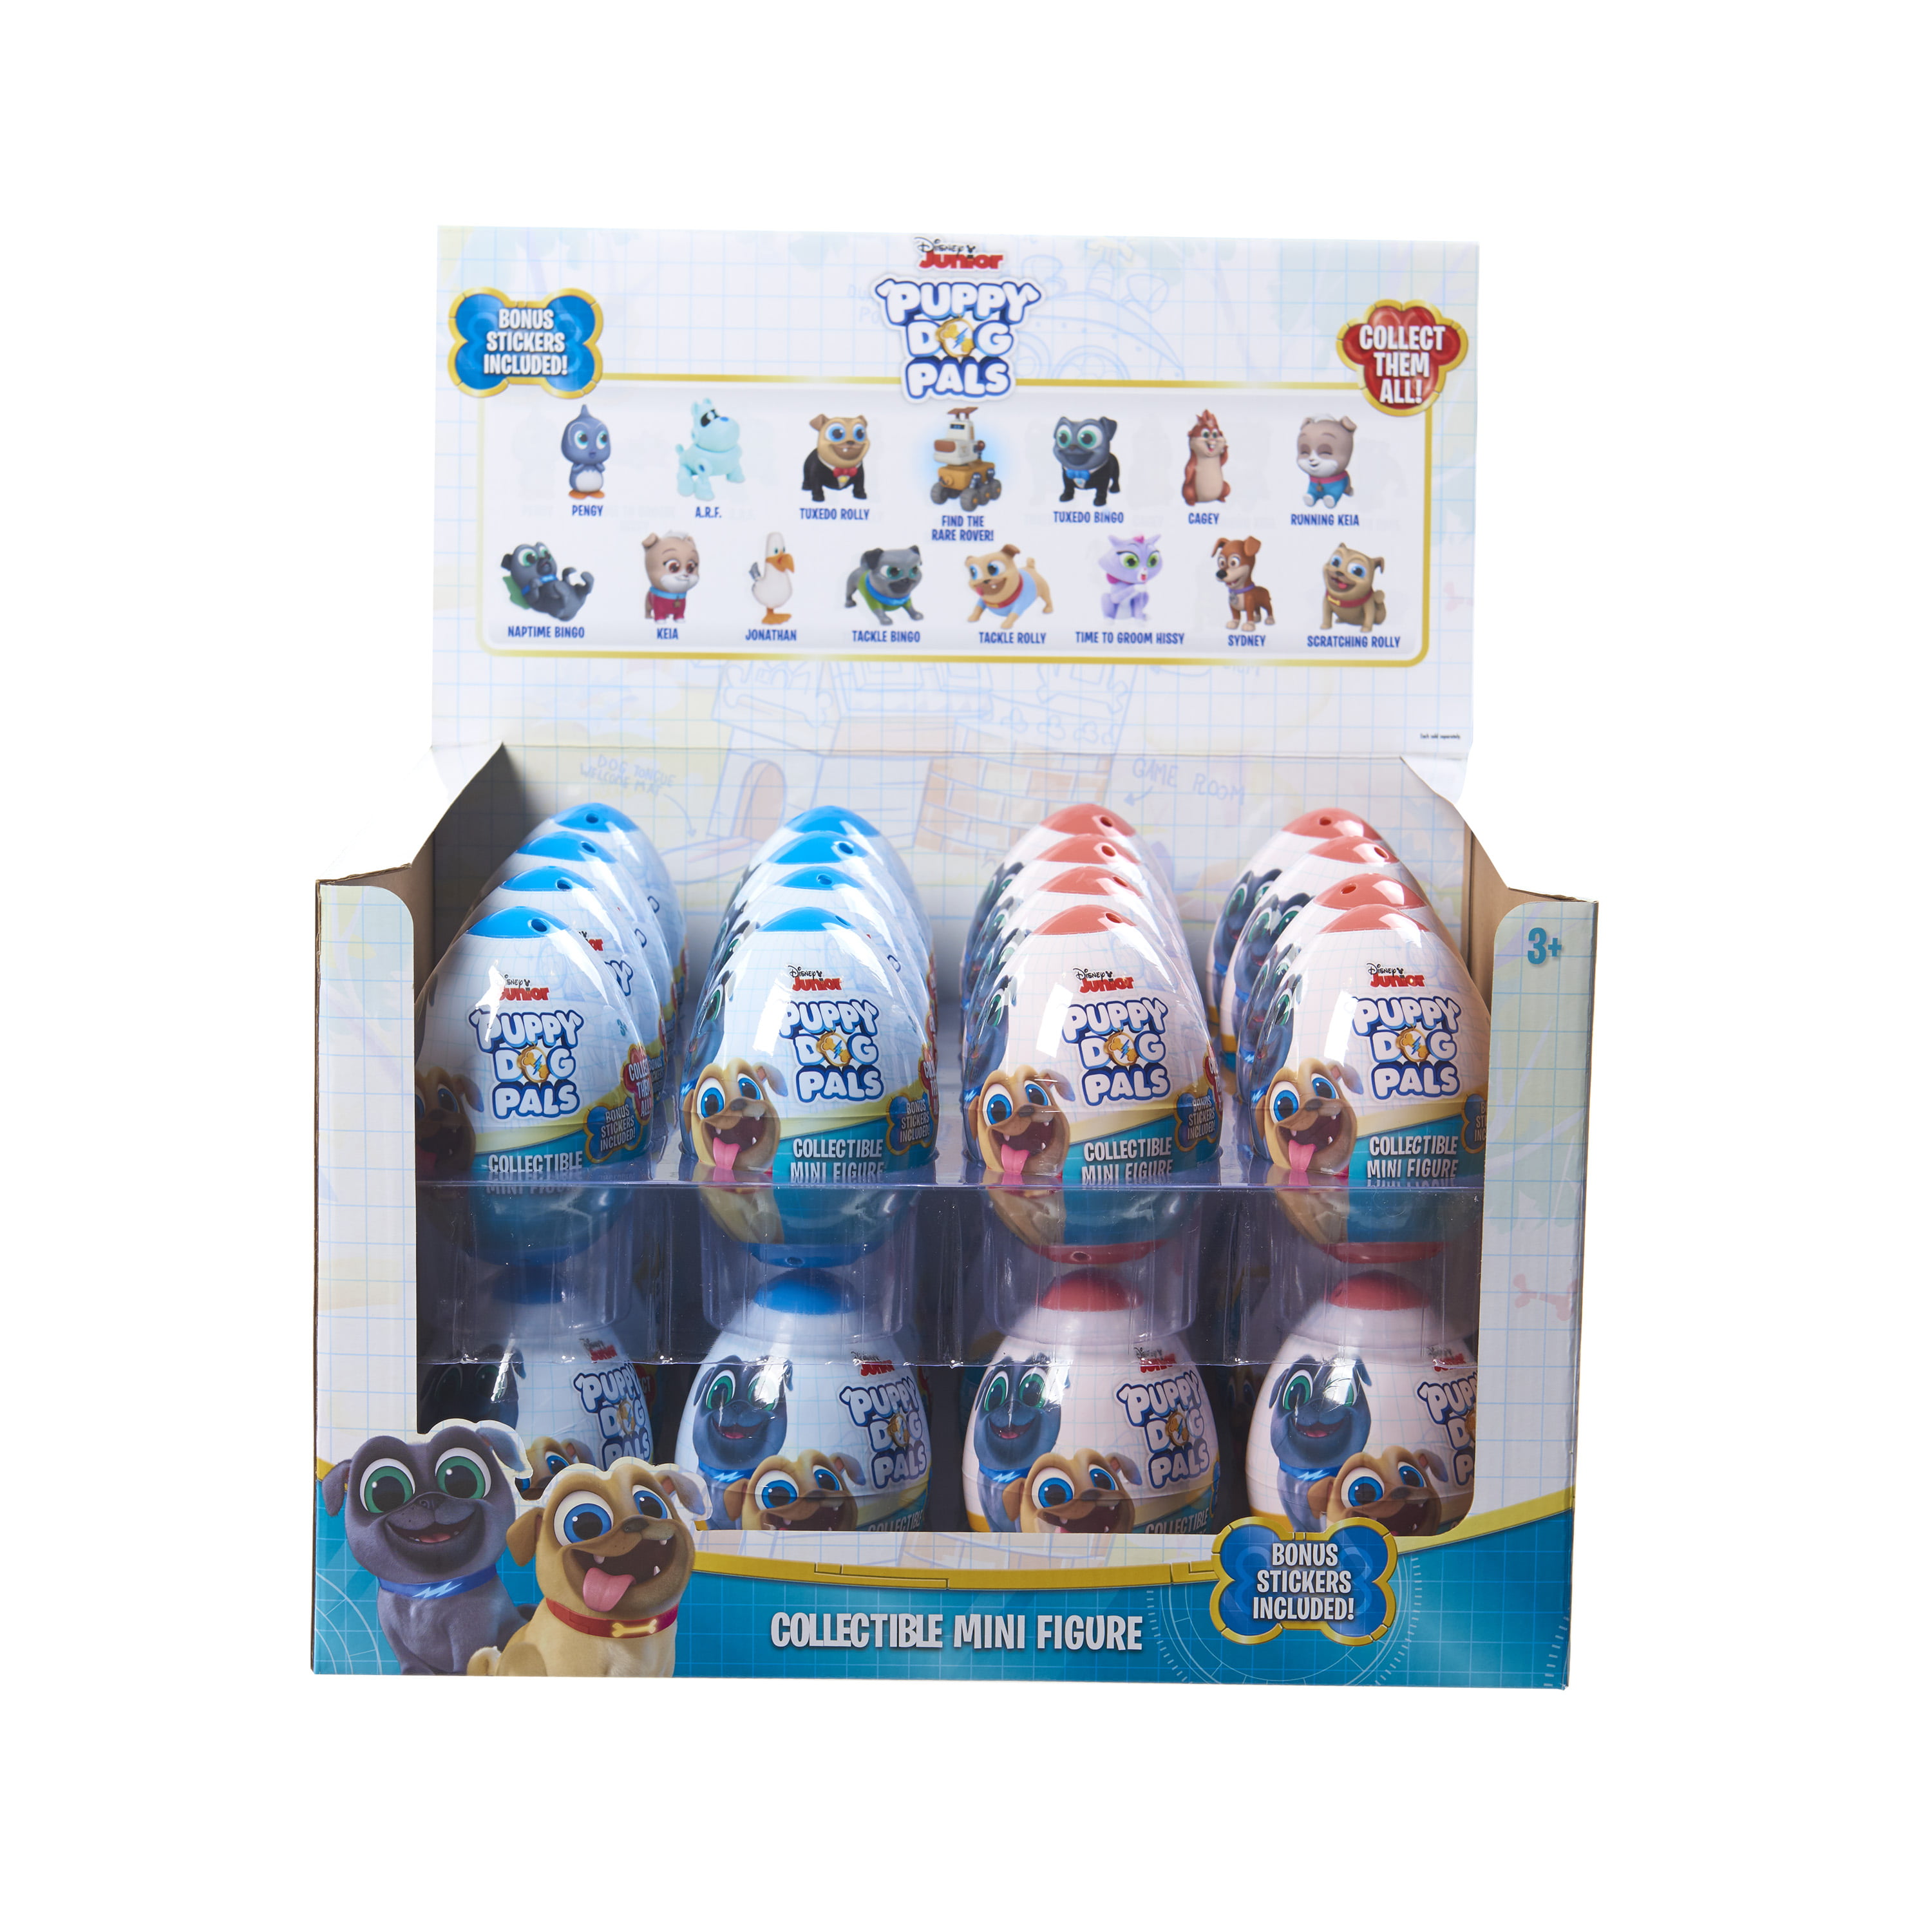 Puppy Dog Pals Collectible Mini Figures 